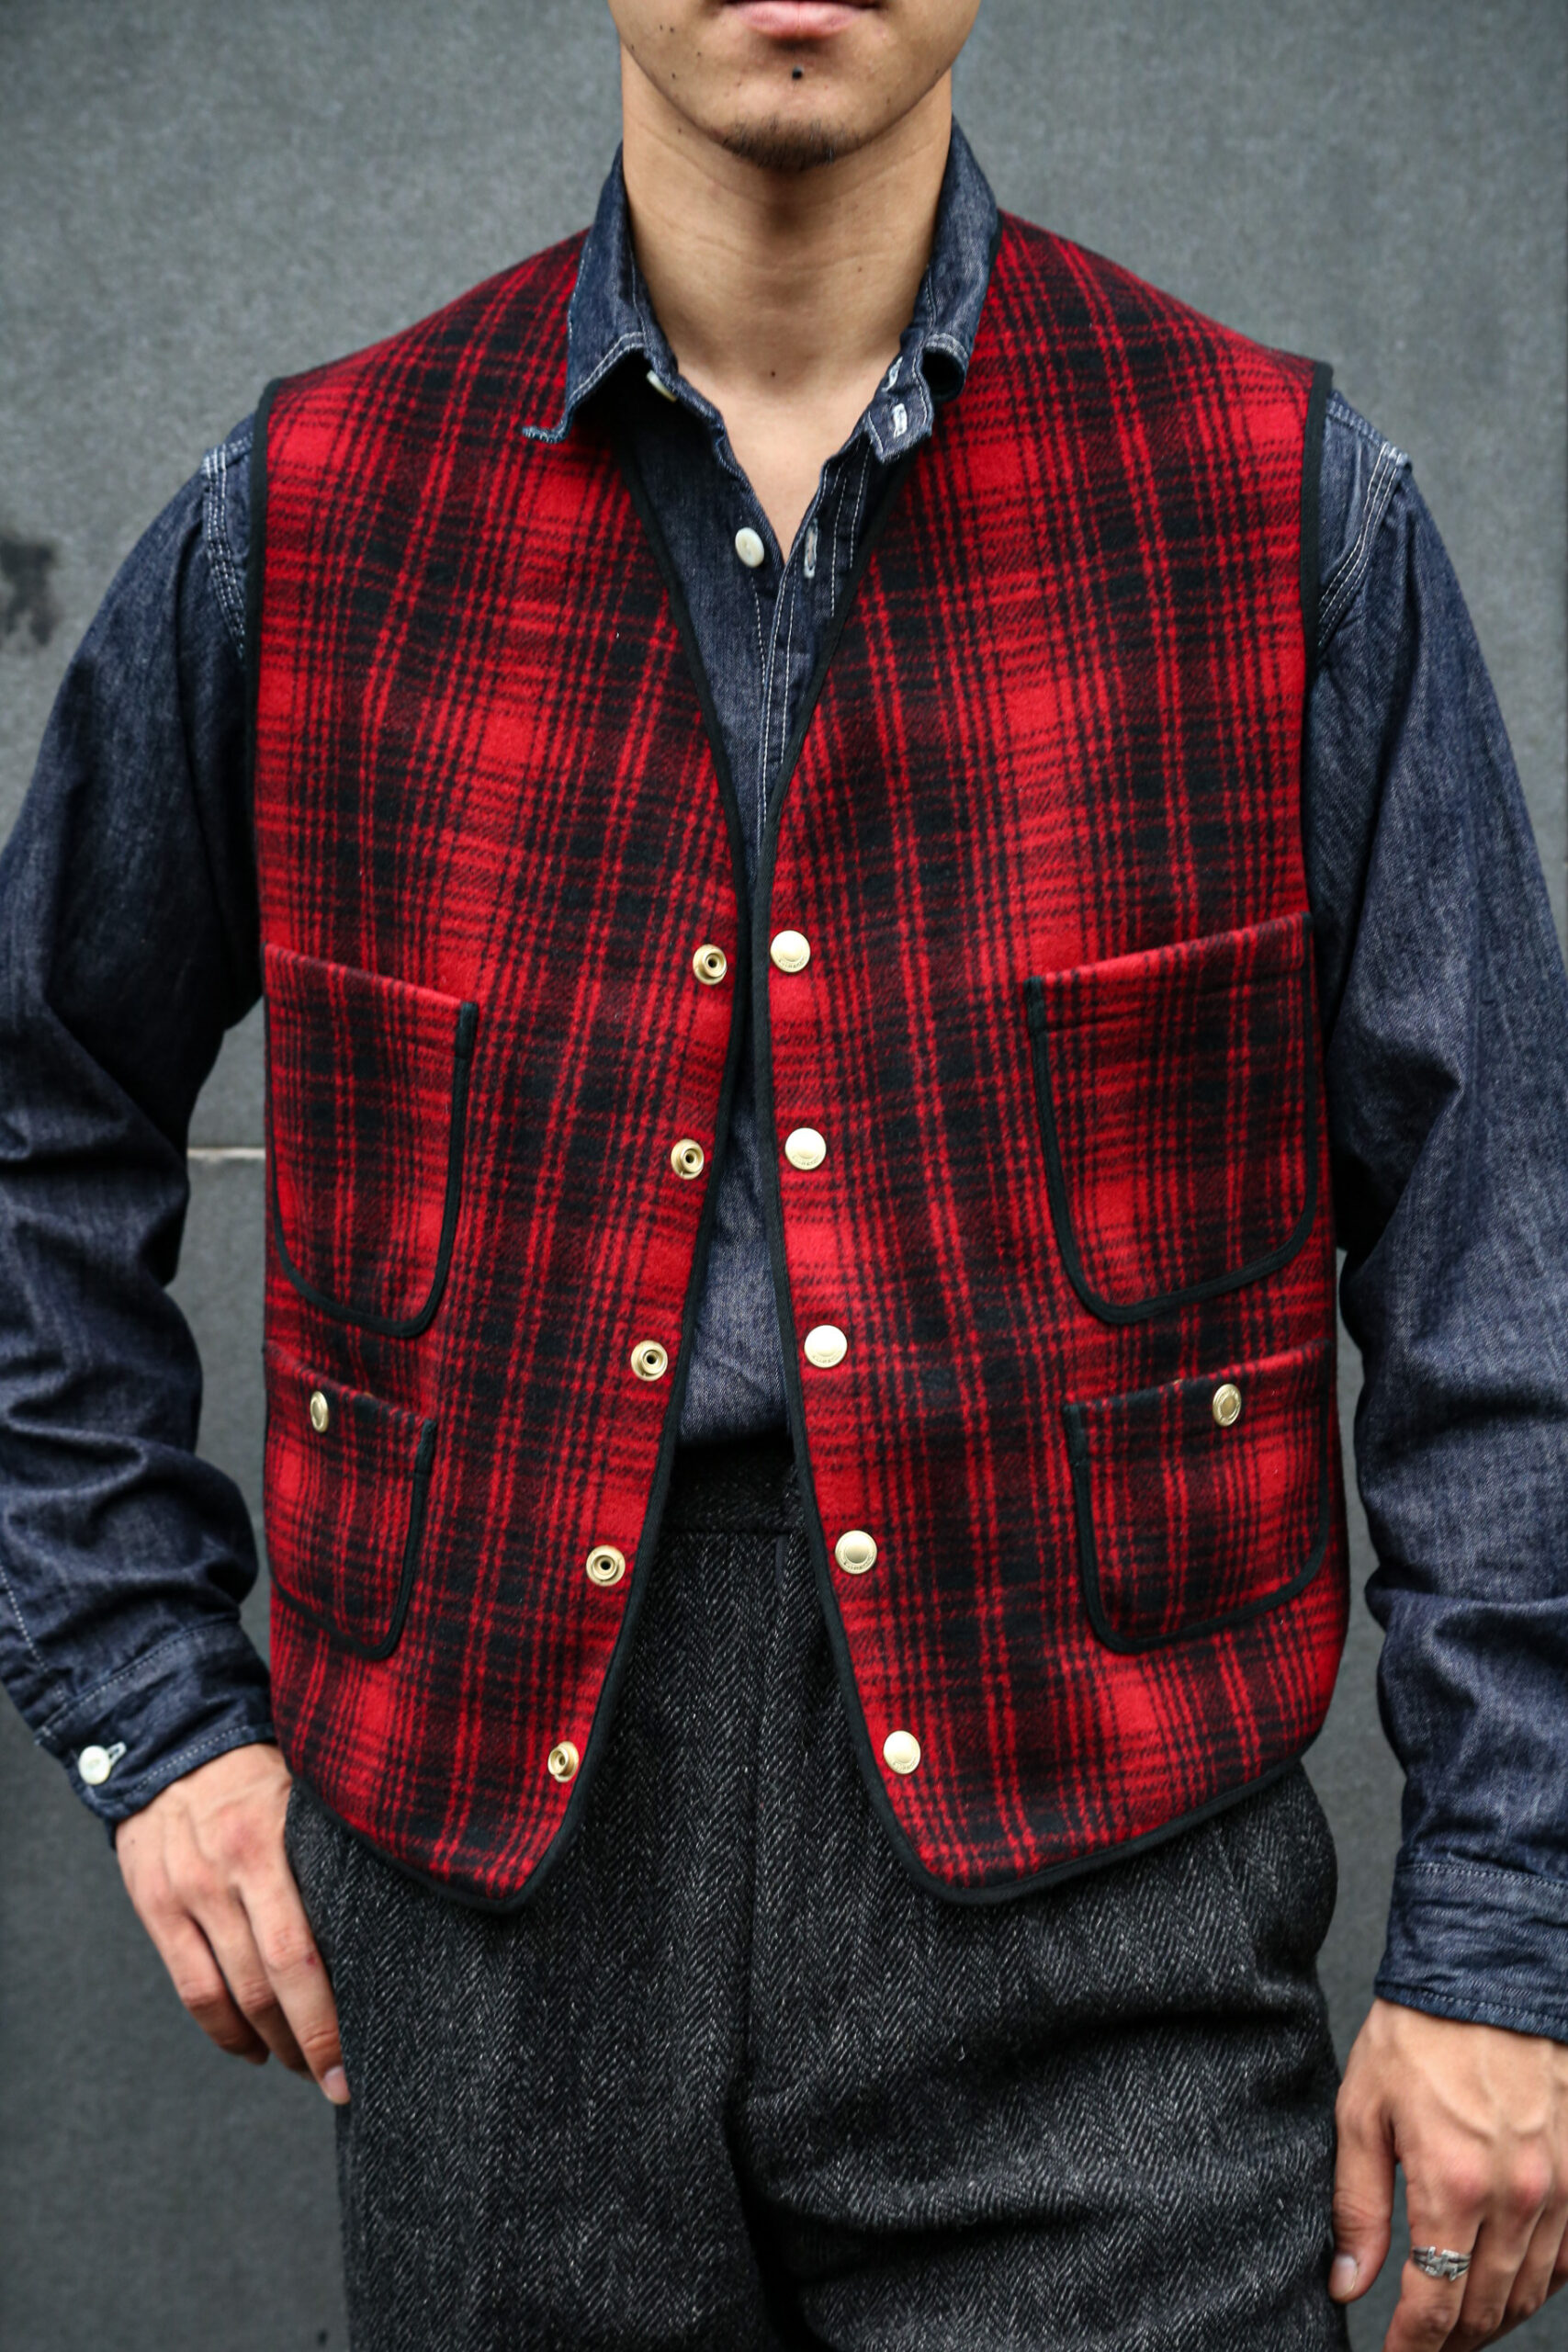 WOOLRICH AUTHENTIC COLLECTION” THE DAY BEFORE | ARCH TOKYO